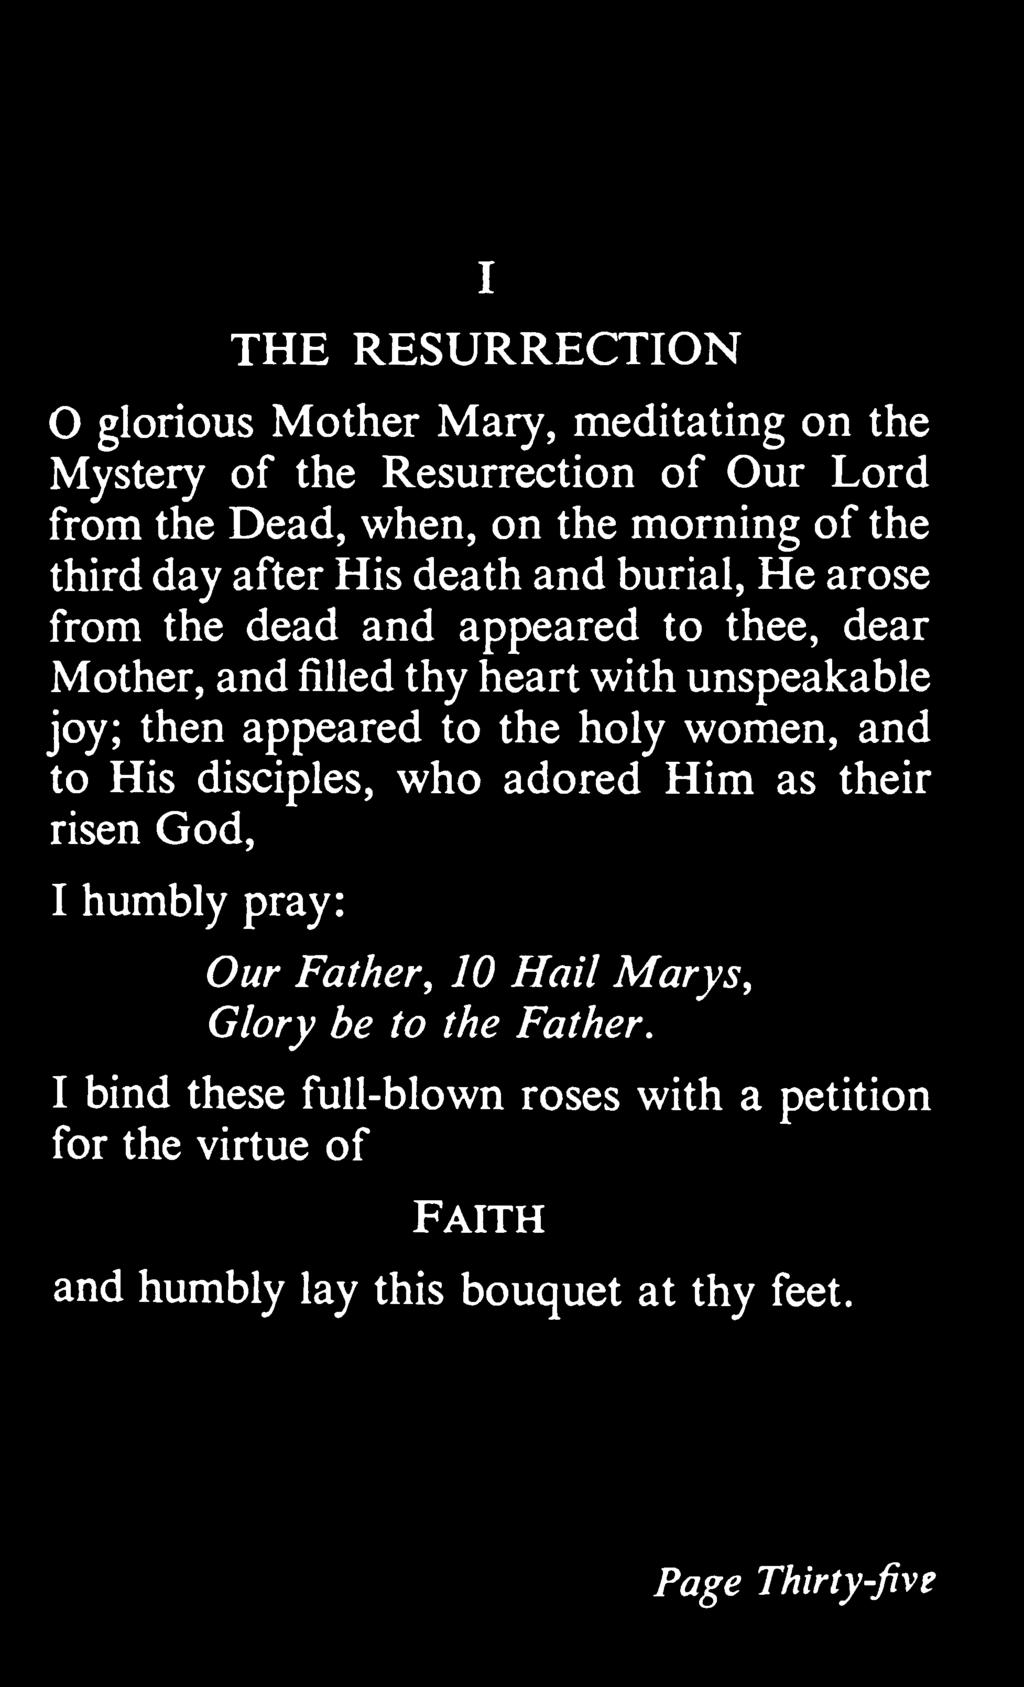 I THE RESURRECTION glorious Mother Mary, meditating on the Mystery of the Resurrection of Our Lord from the Dead, when, on the morning of the third day after His death and burial.